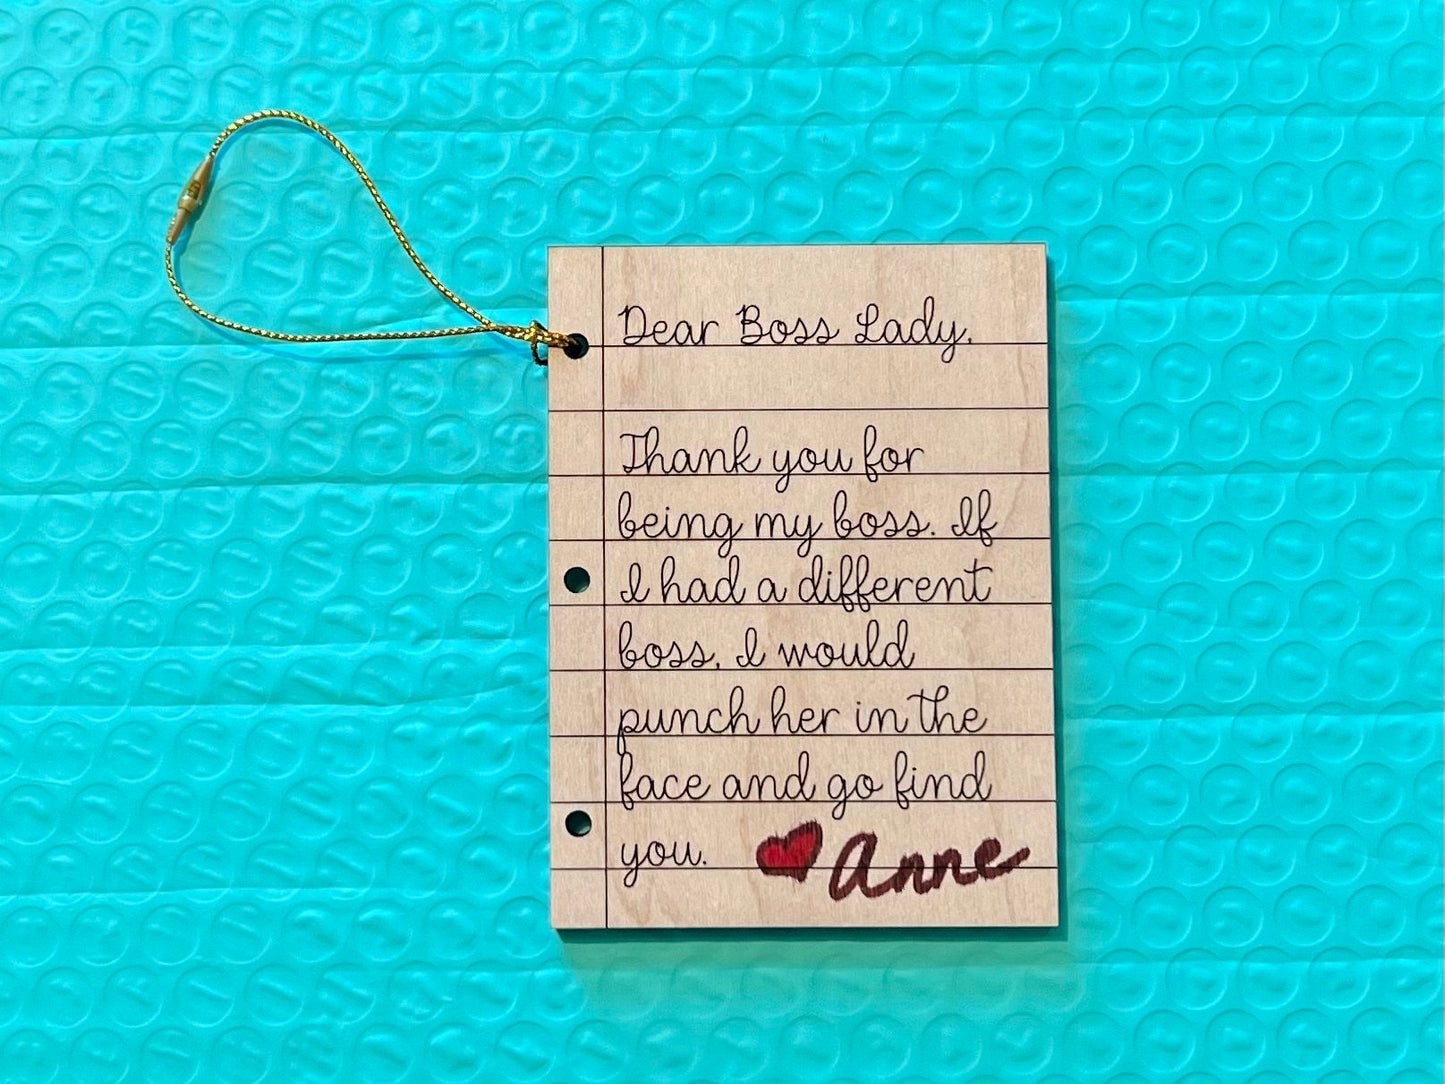 Dear Boss Lady Ornament, Funny Boss Gift, Christmas Gift or Gift Tag for Boss Lady